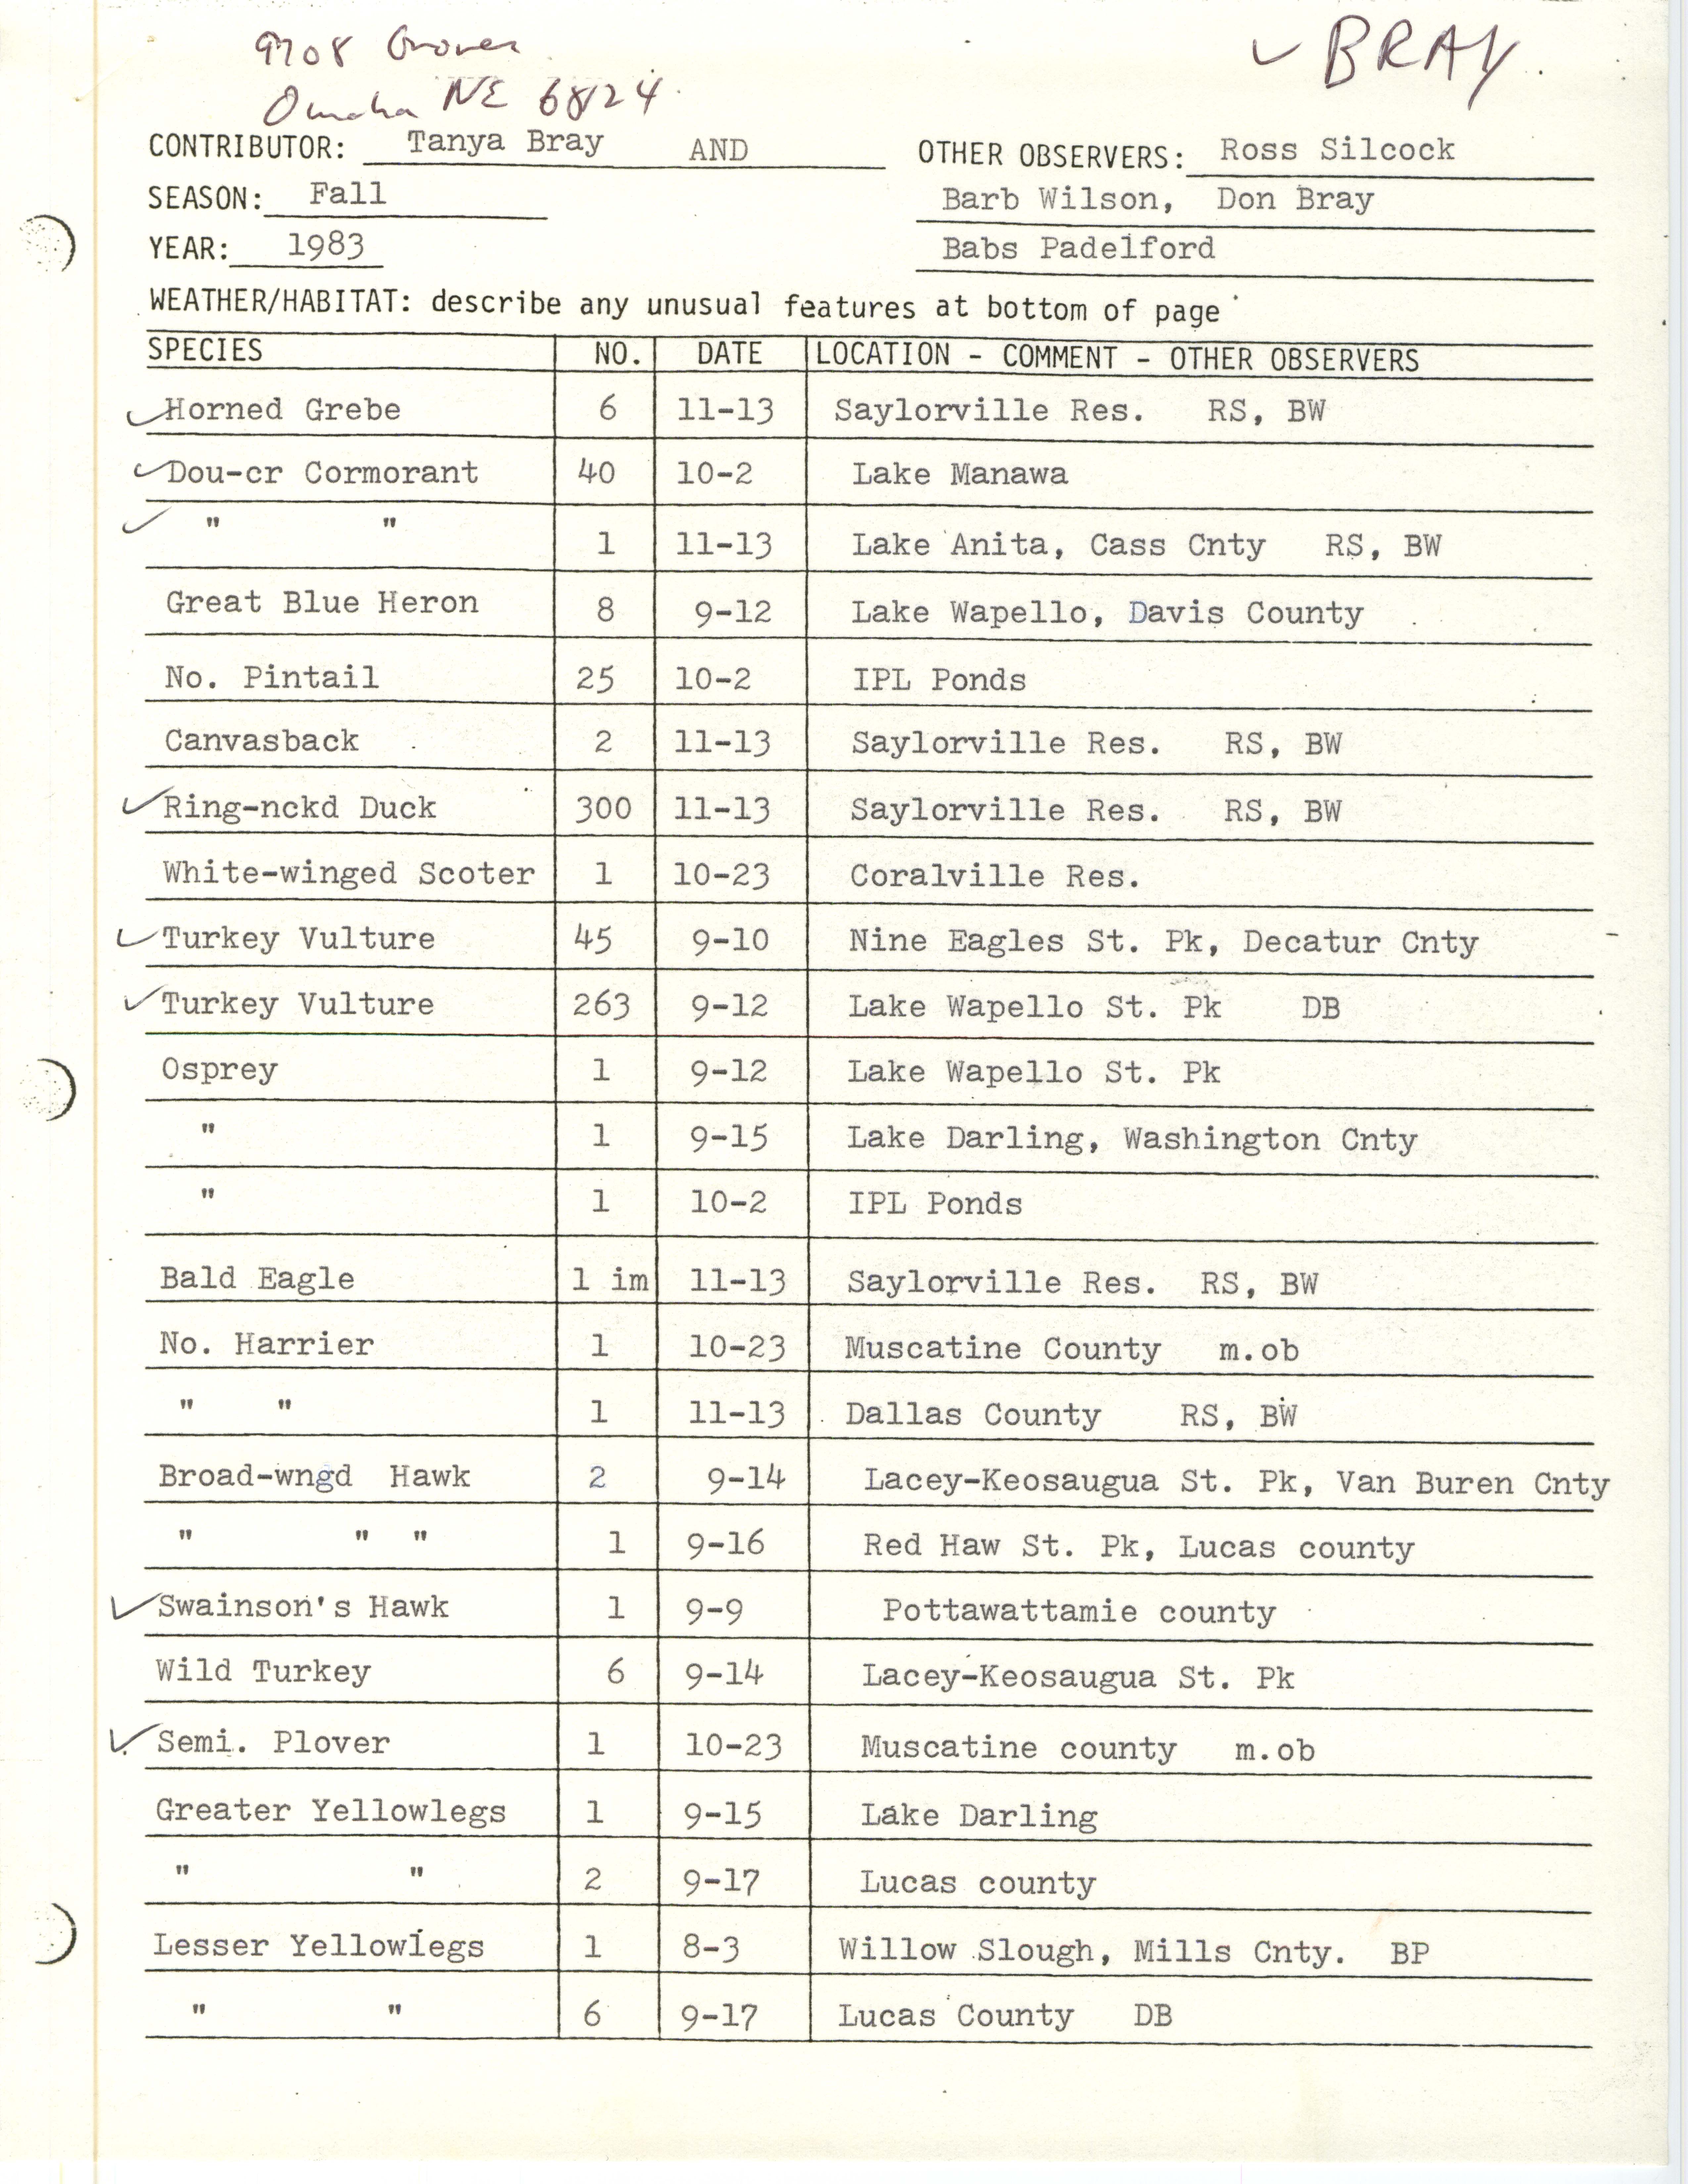 Annotated bird sighting list for fall 1983 compiled by Tanya Bray